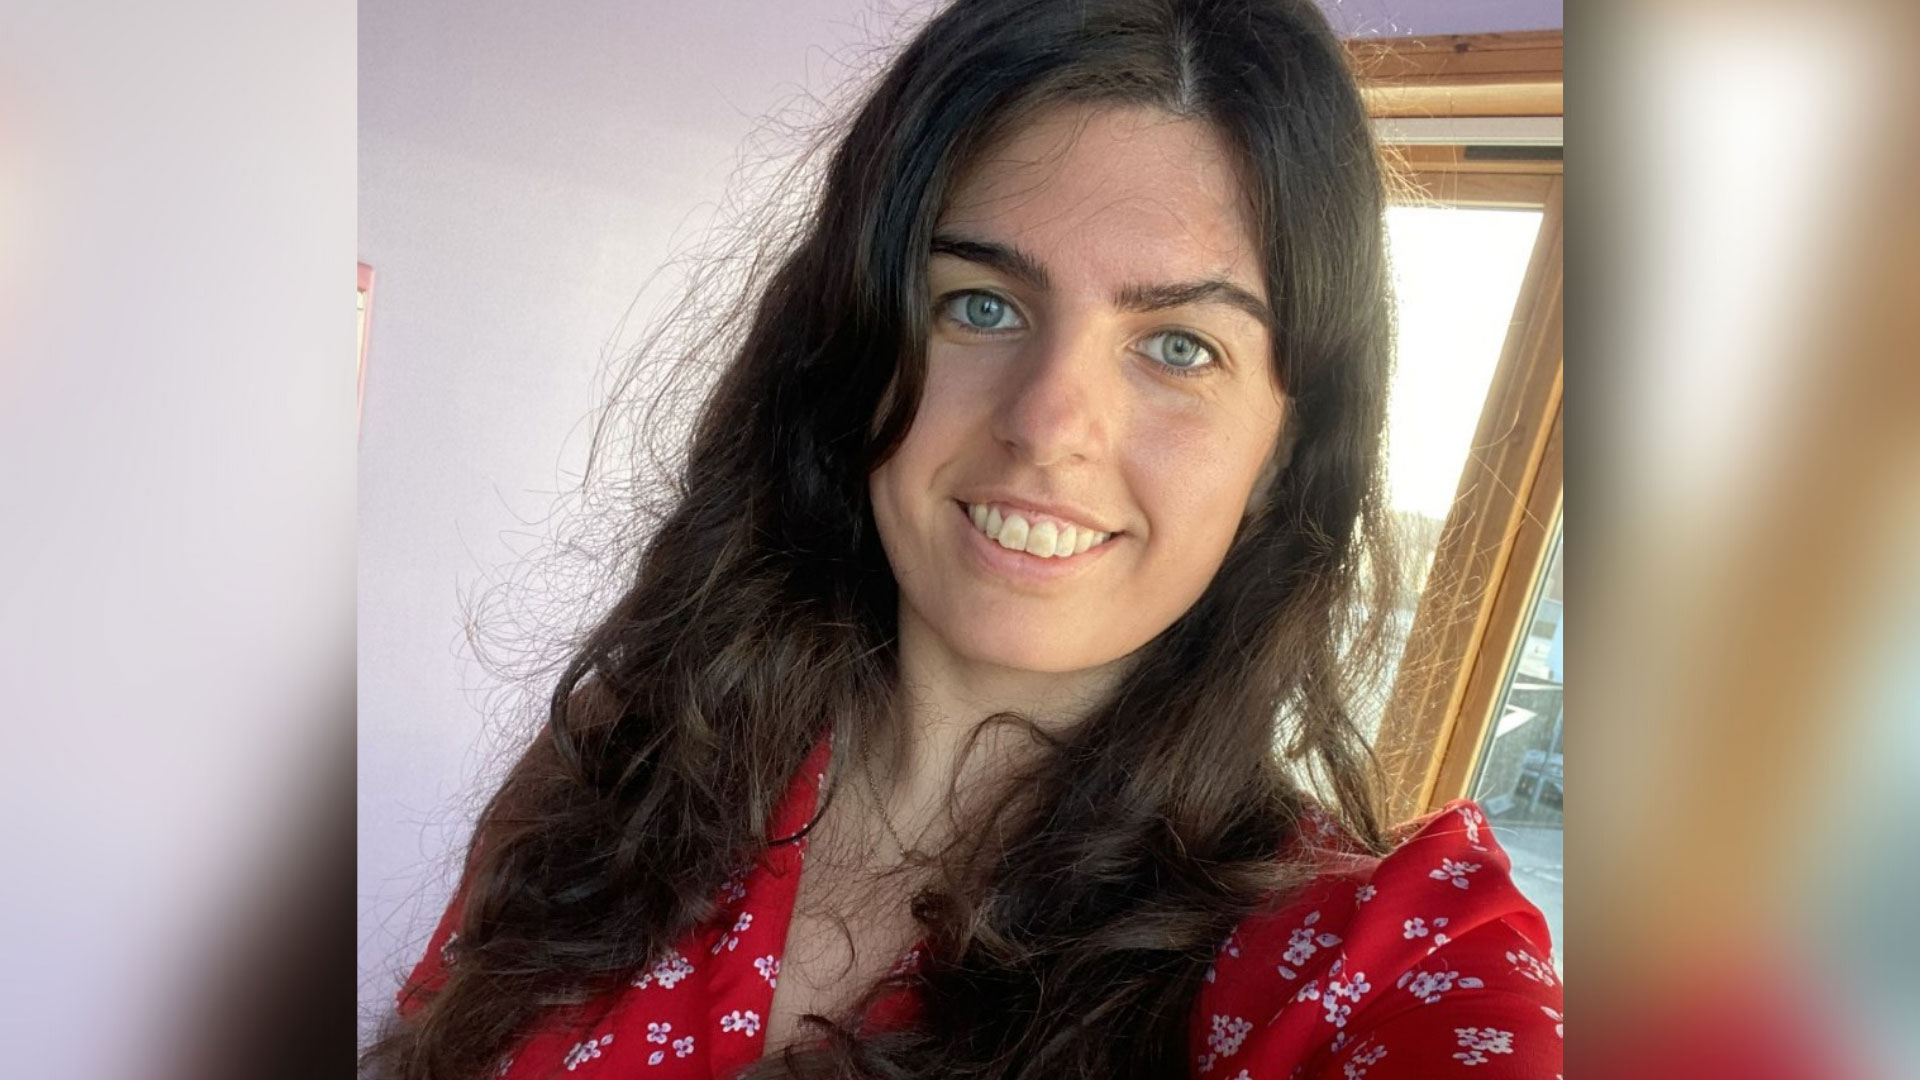 Campaigner Sophie is white with long dark brown hair and a facial visible difference. In this photo she wears a red dress with white flowers on it and the photo captures her head and shoulders.